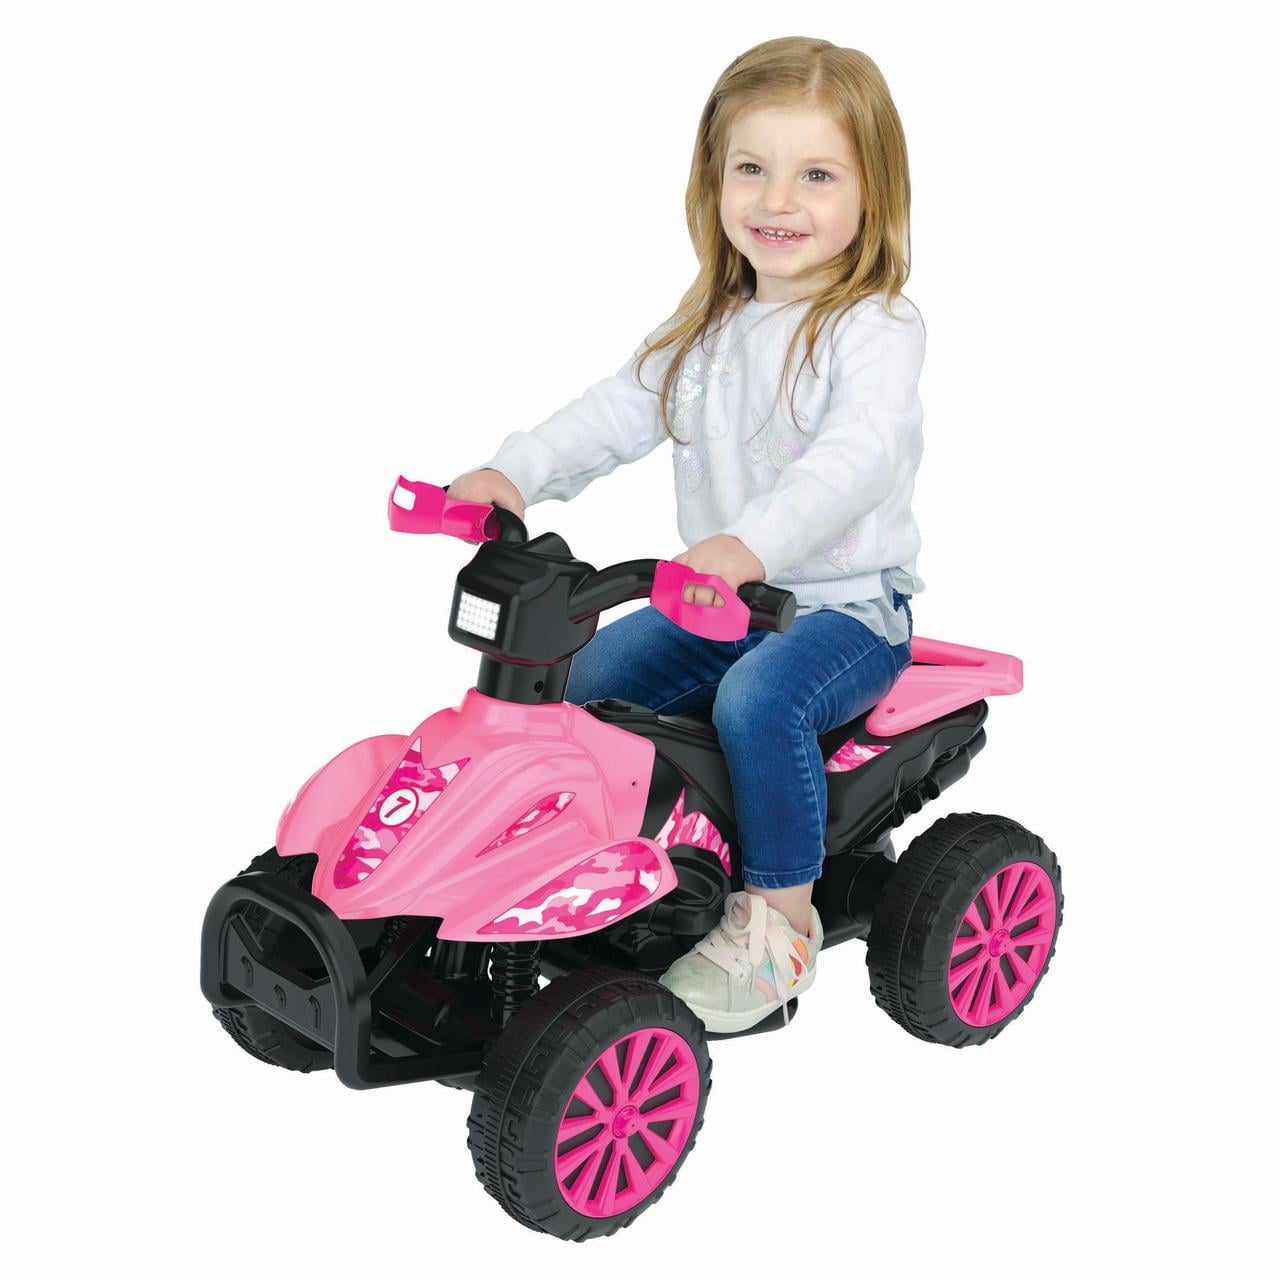 Pink NEW Huffy 6V Quad Trailer Ride on Toy for Kids 